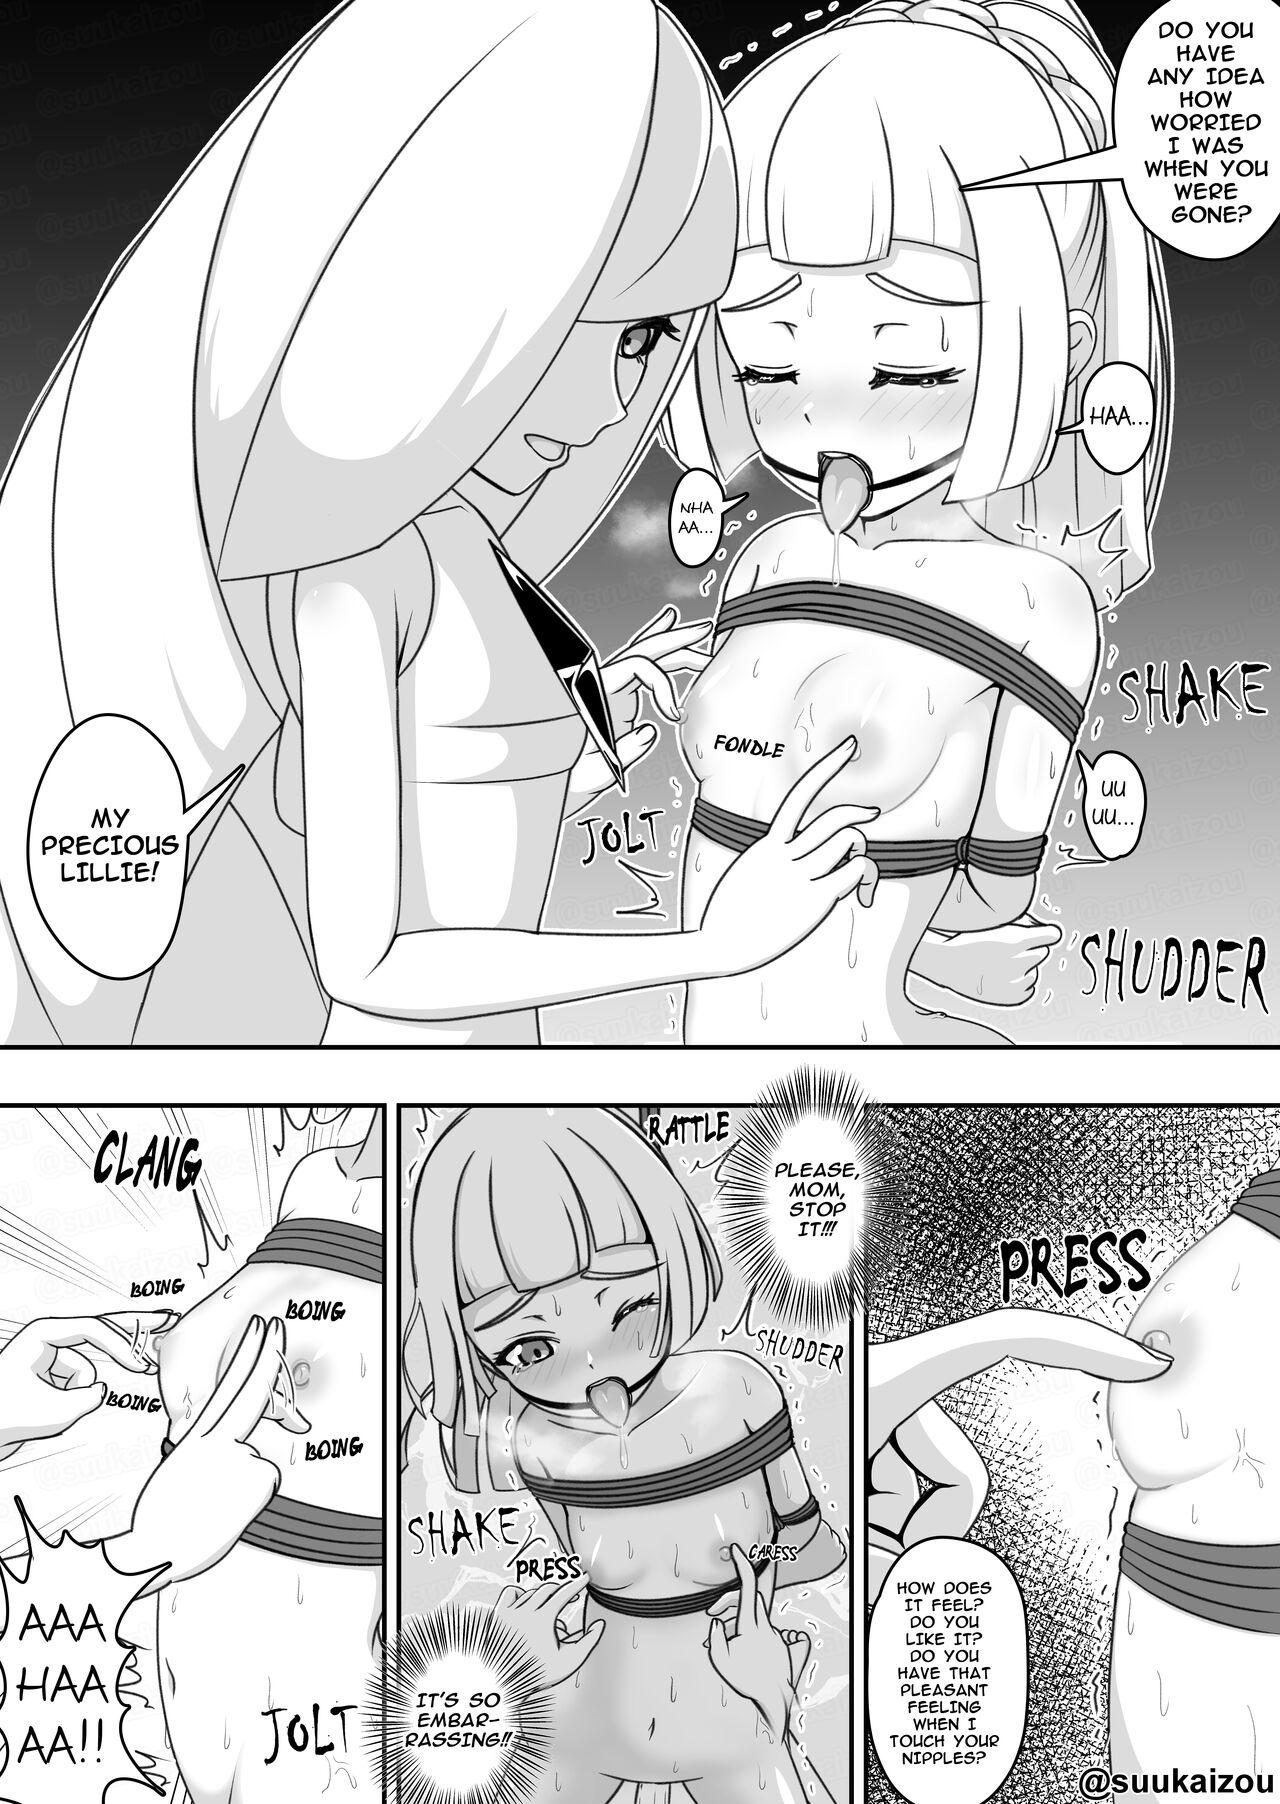 Lillie gets spanked by Lusamine. 2